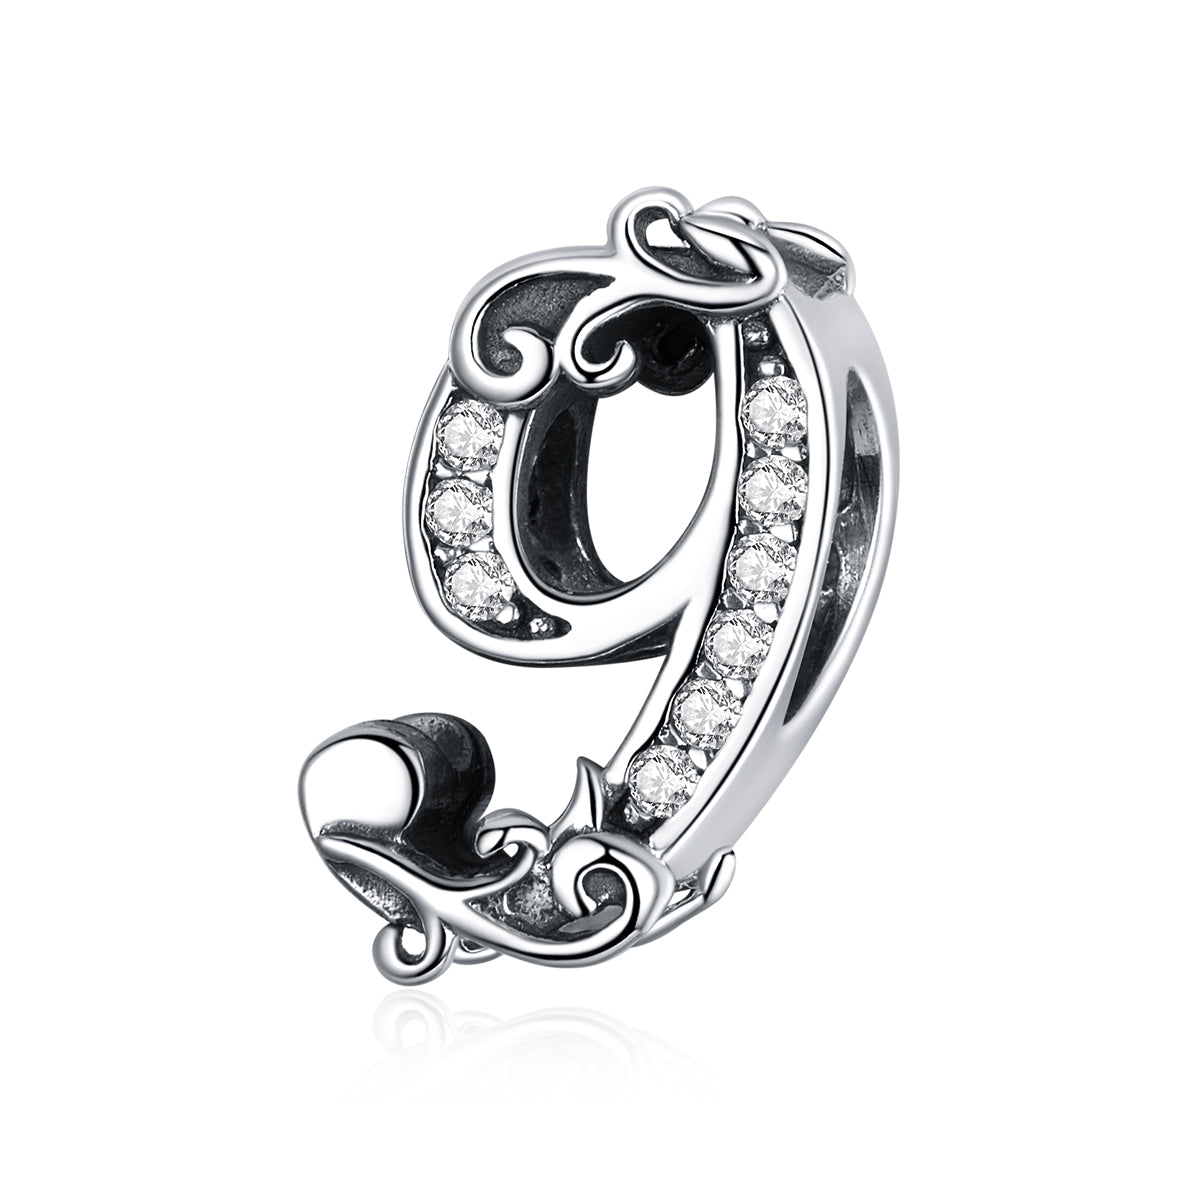 Sterling 925 silver charm the number 0-9 bead pendant fits Pandora charm and European charm bracelet Xaxe.com